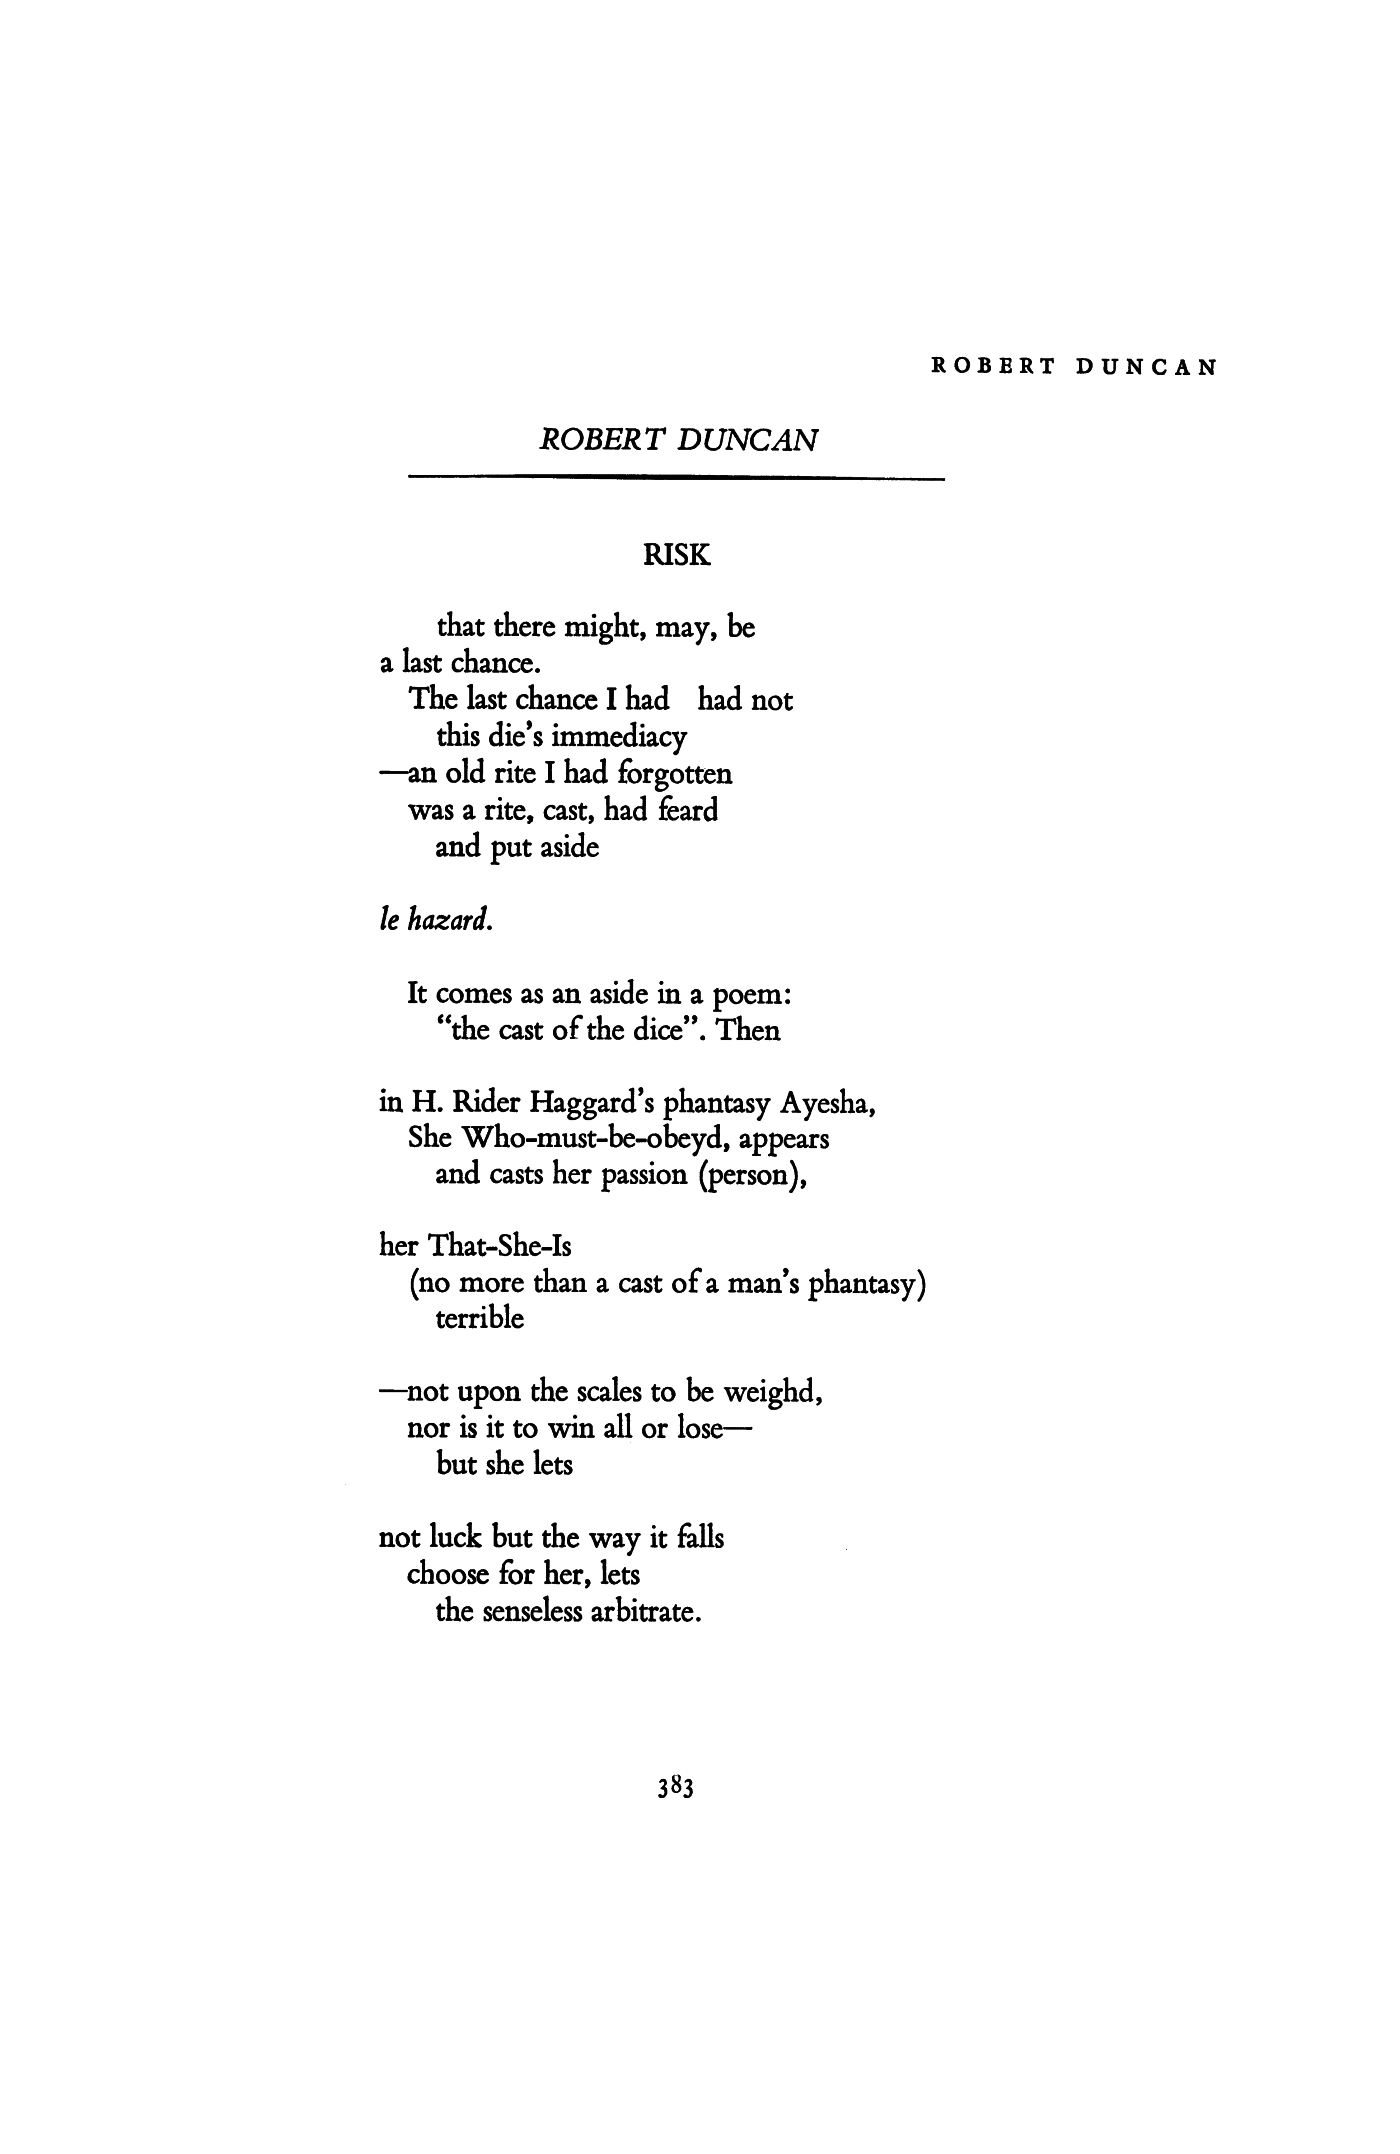 poem about risk